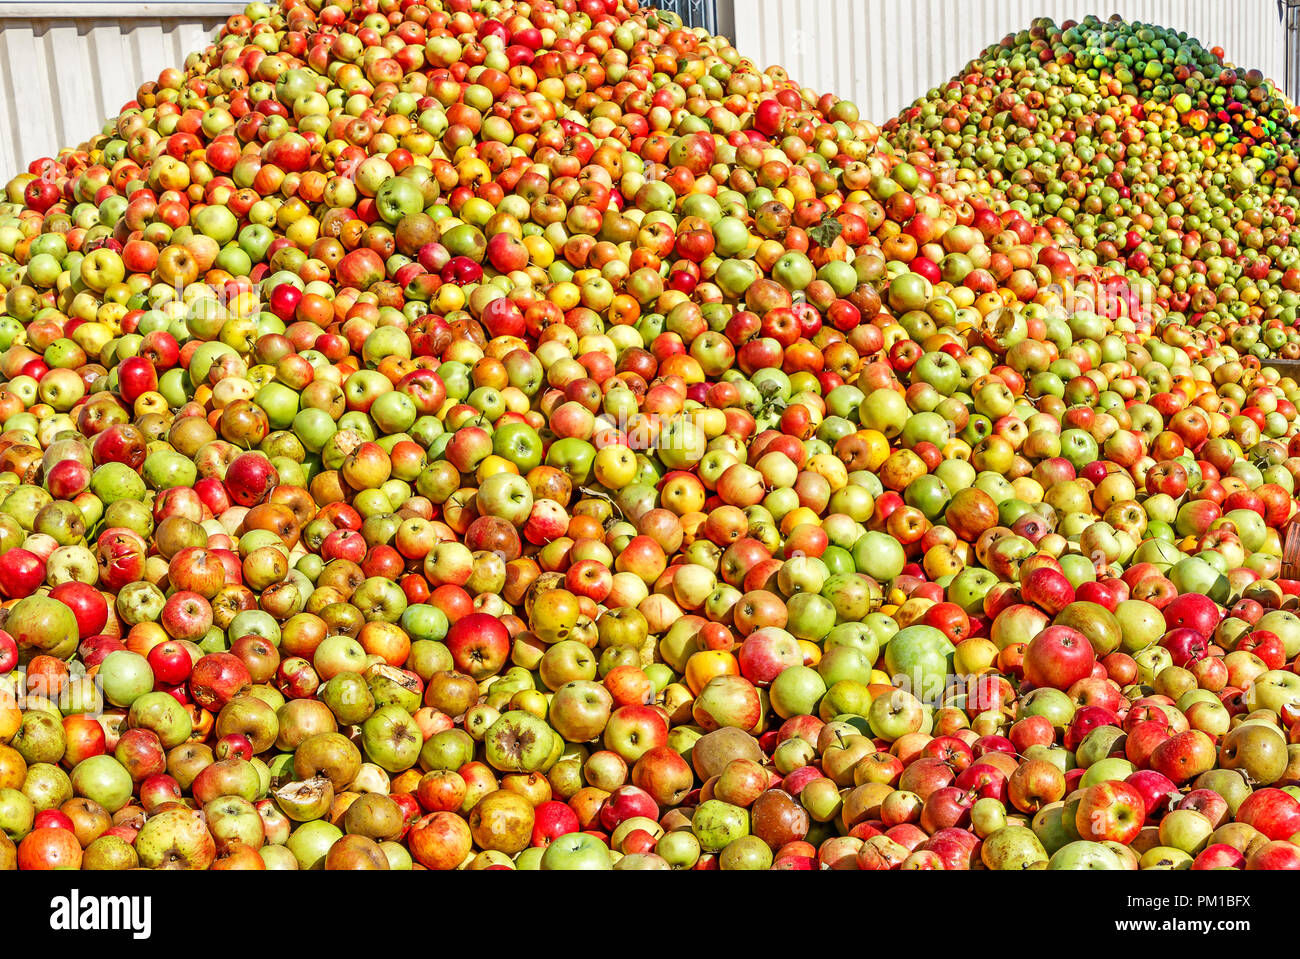 Mountains of apples for making cider in Hesse, Germany Stock Photo